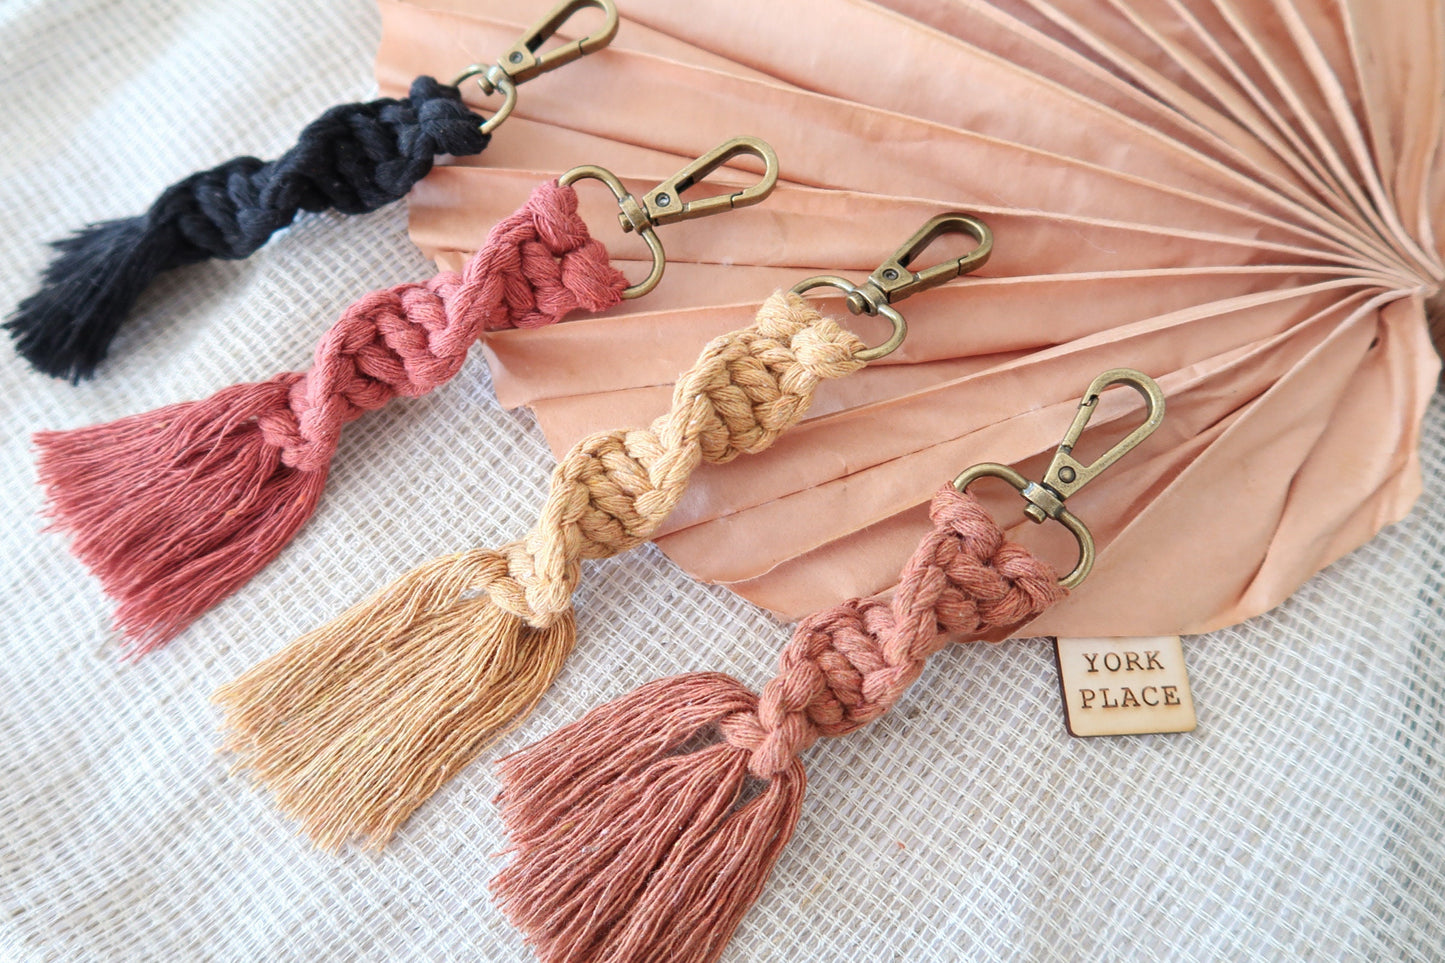 Twisted Knot Macrame Keyring - Rust, Butter, Amber, Black